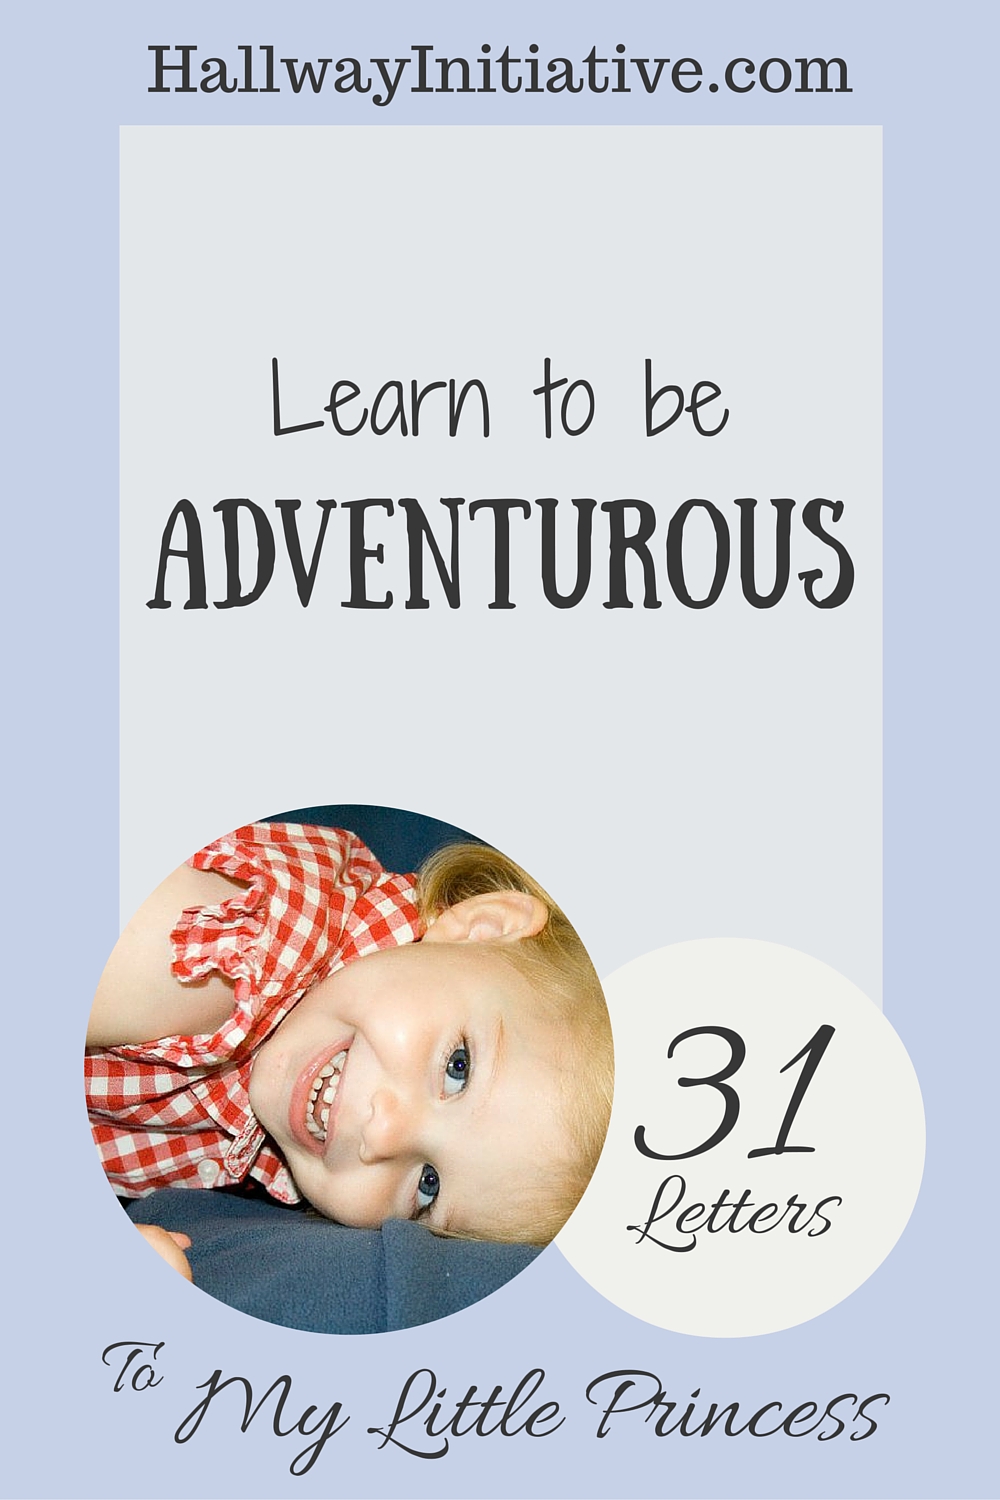 Learn to be adventurous